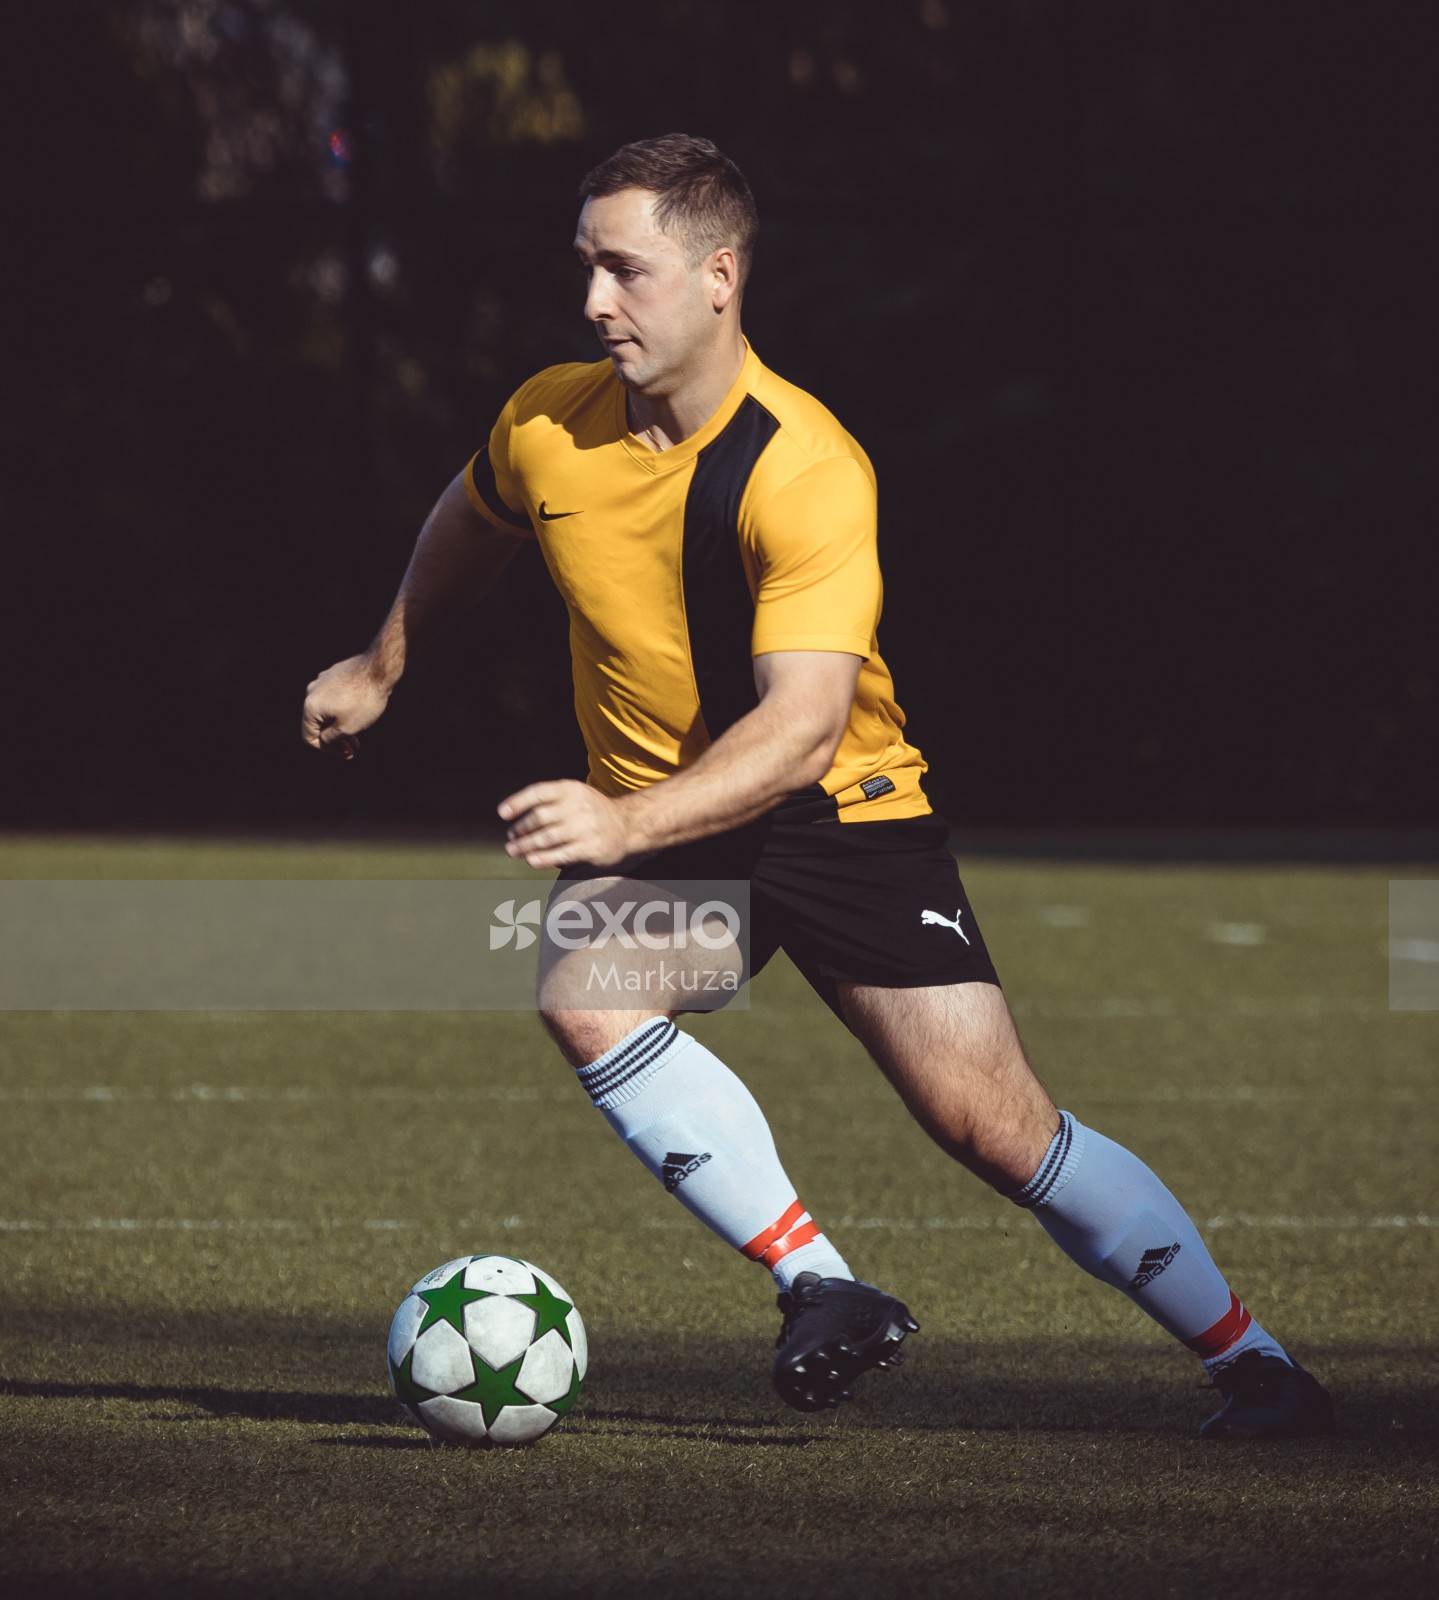 Football player dashing with the ball - Sports Zone sunday league